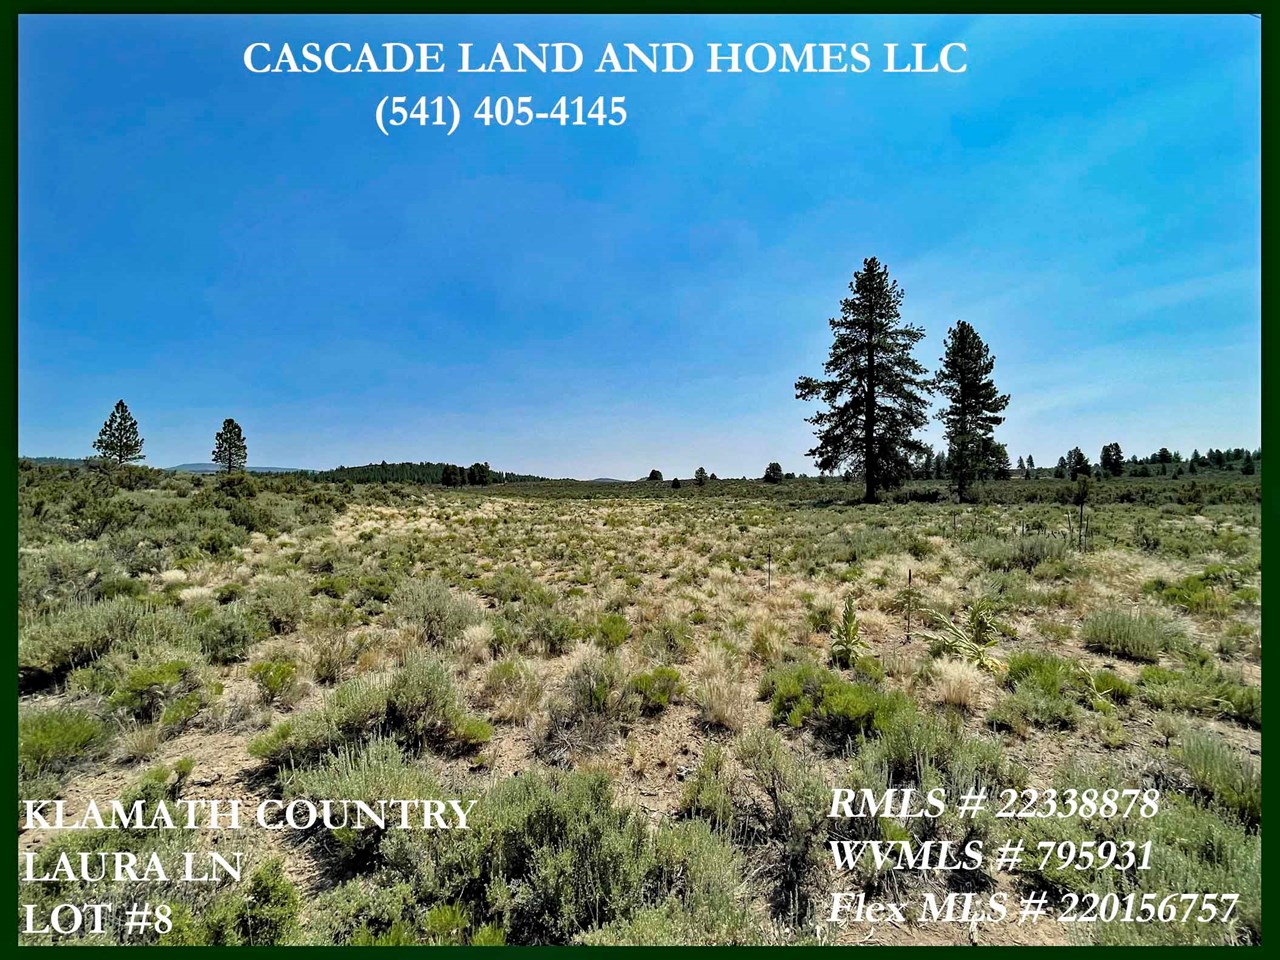 this large, 1.08 ~acre property is located in the klamath country subdivision between chiloquin and sprague river, oregon. with the wide-open space here, and gorgeous views of the valley and pasture land, you really get the feeling like you are out in the old west of years ago.